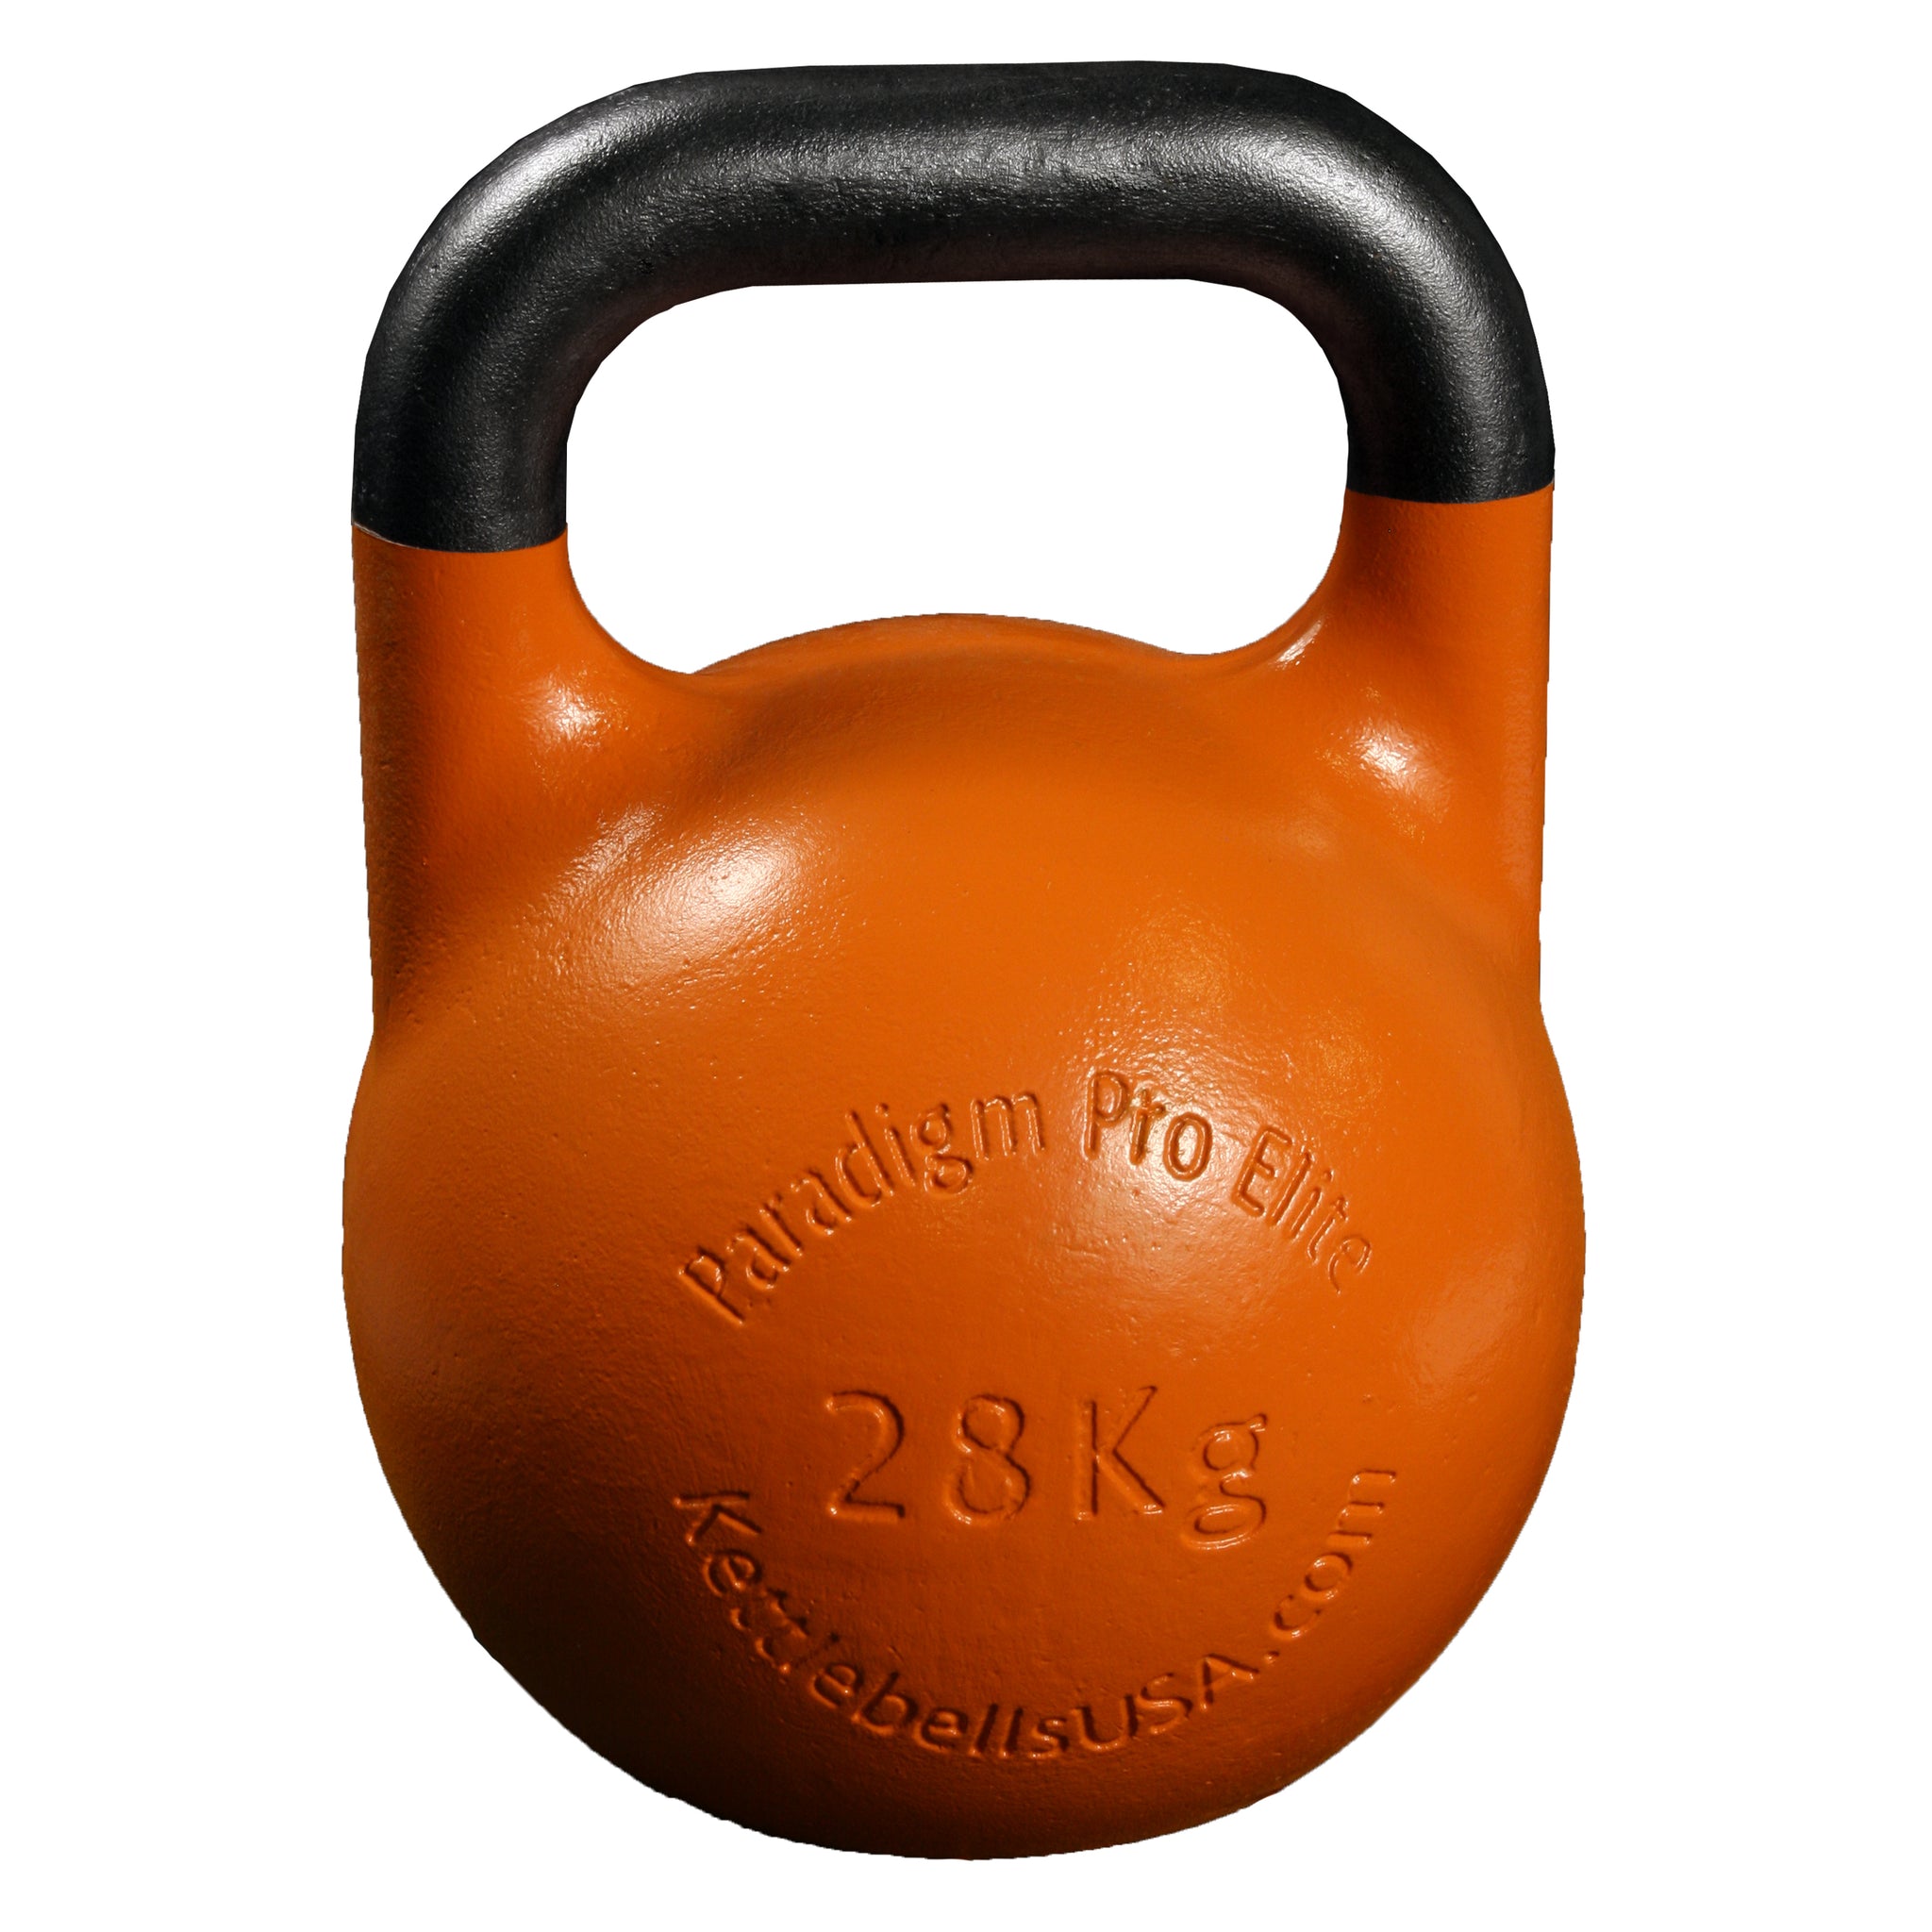 8 kg Kettlebell - Competition ( 17.63 lbs )